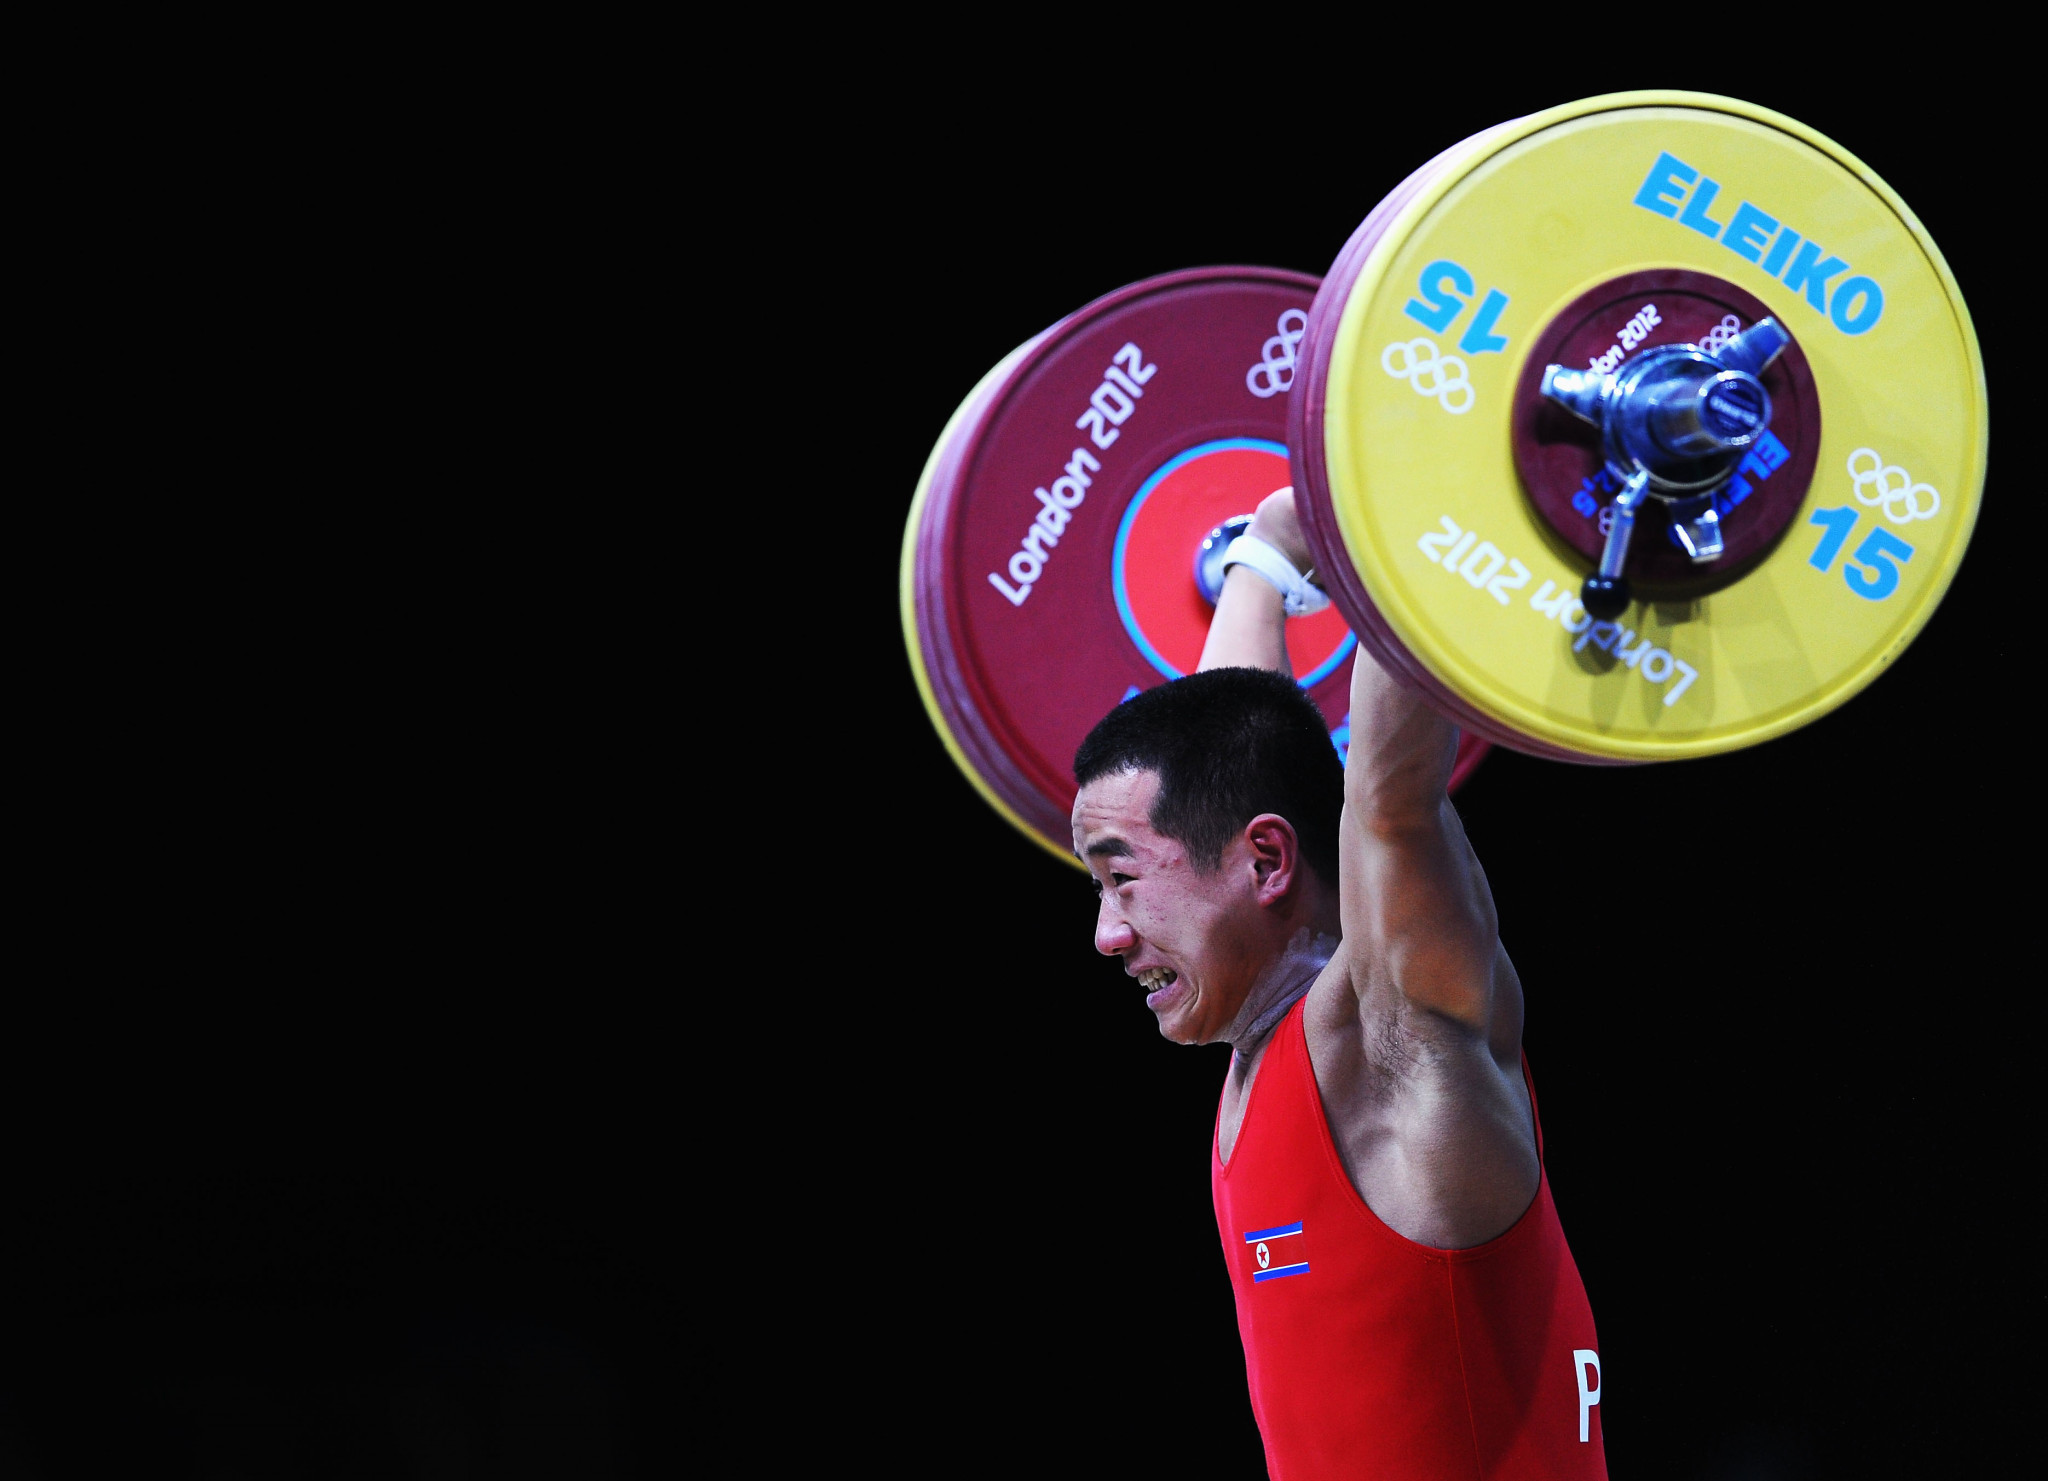 Exclusive: Potential medallists face exclusion from Paris 2024 weightlifting in clampdown on testing 